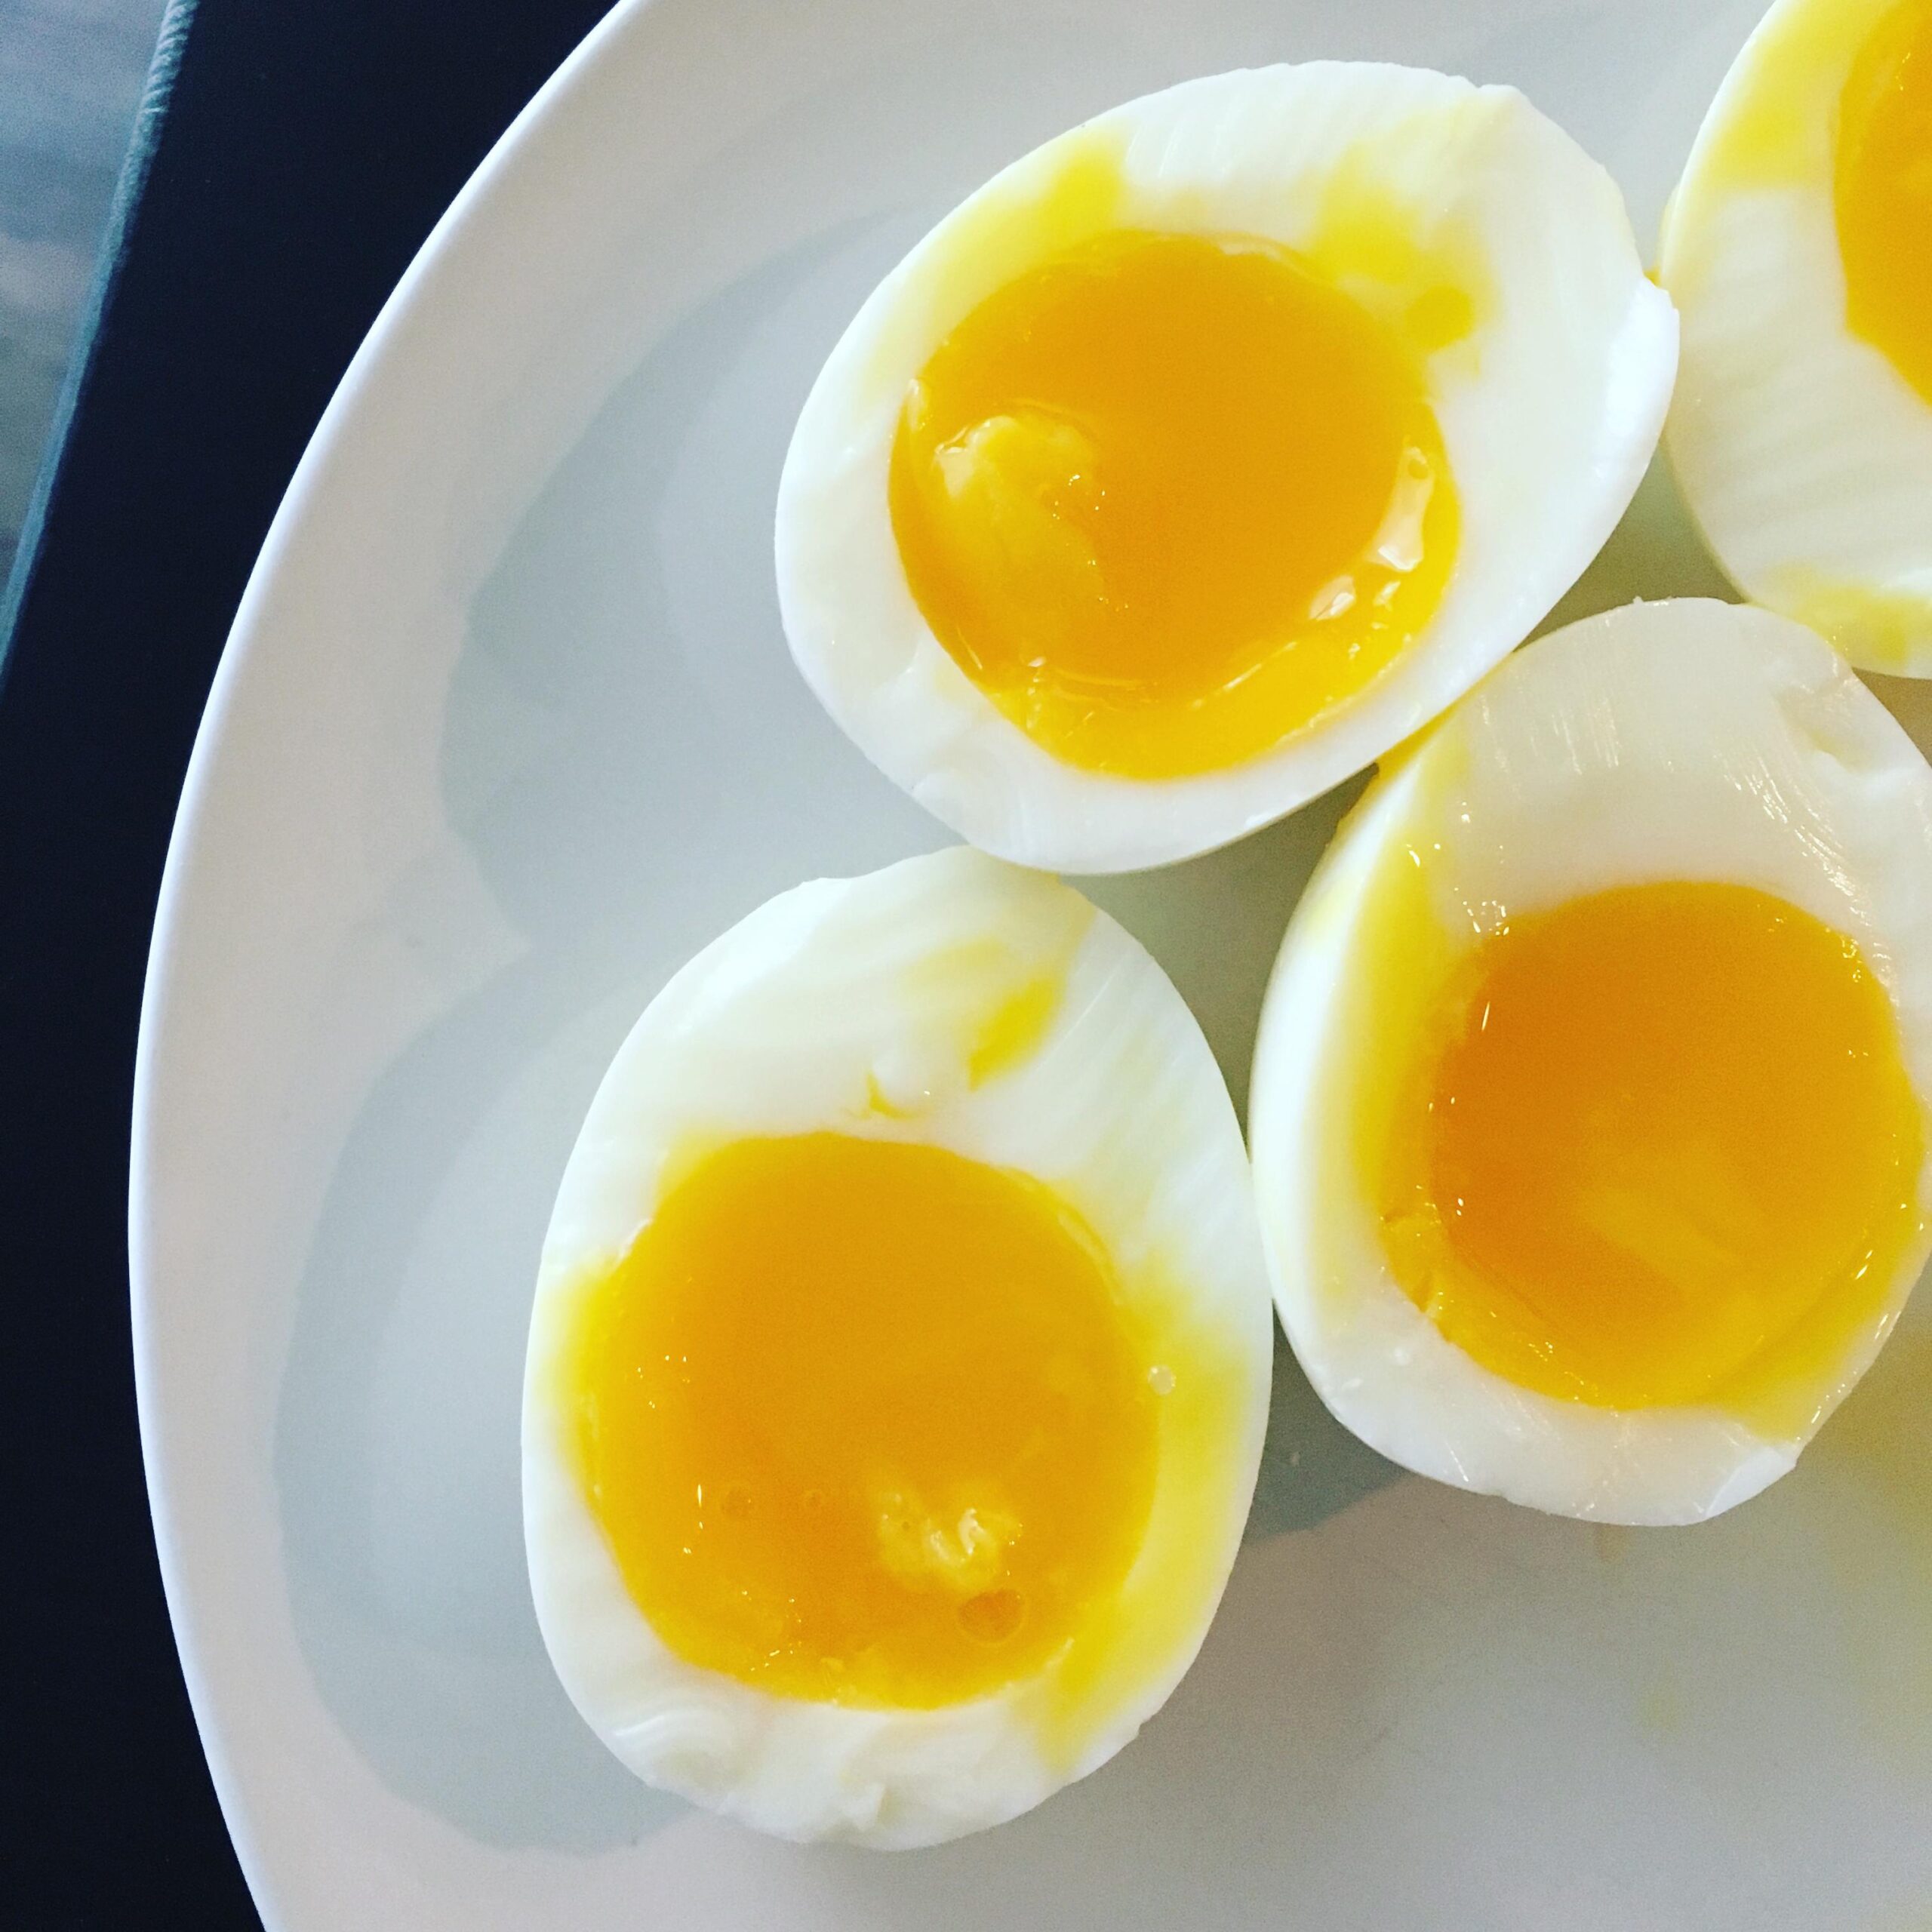  Ready to learn the easiest and quickest way to make soft boiled eggs in your Instant Pot?